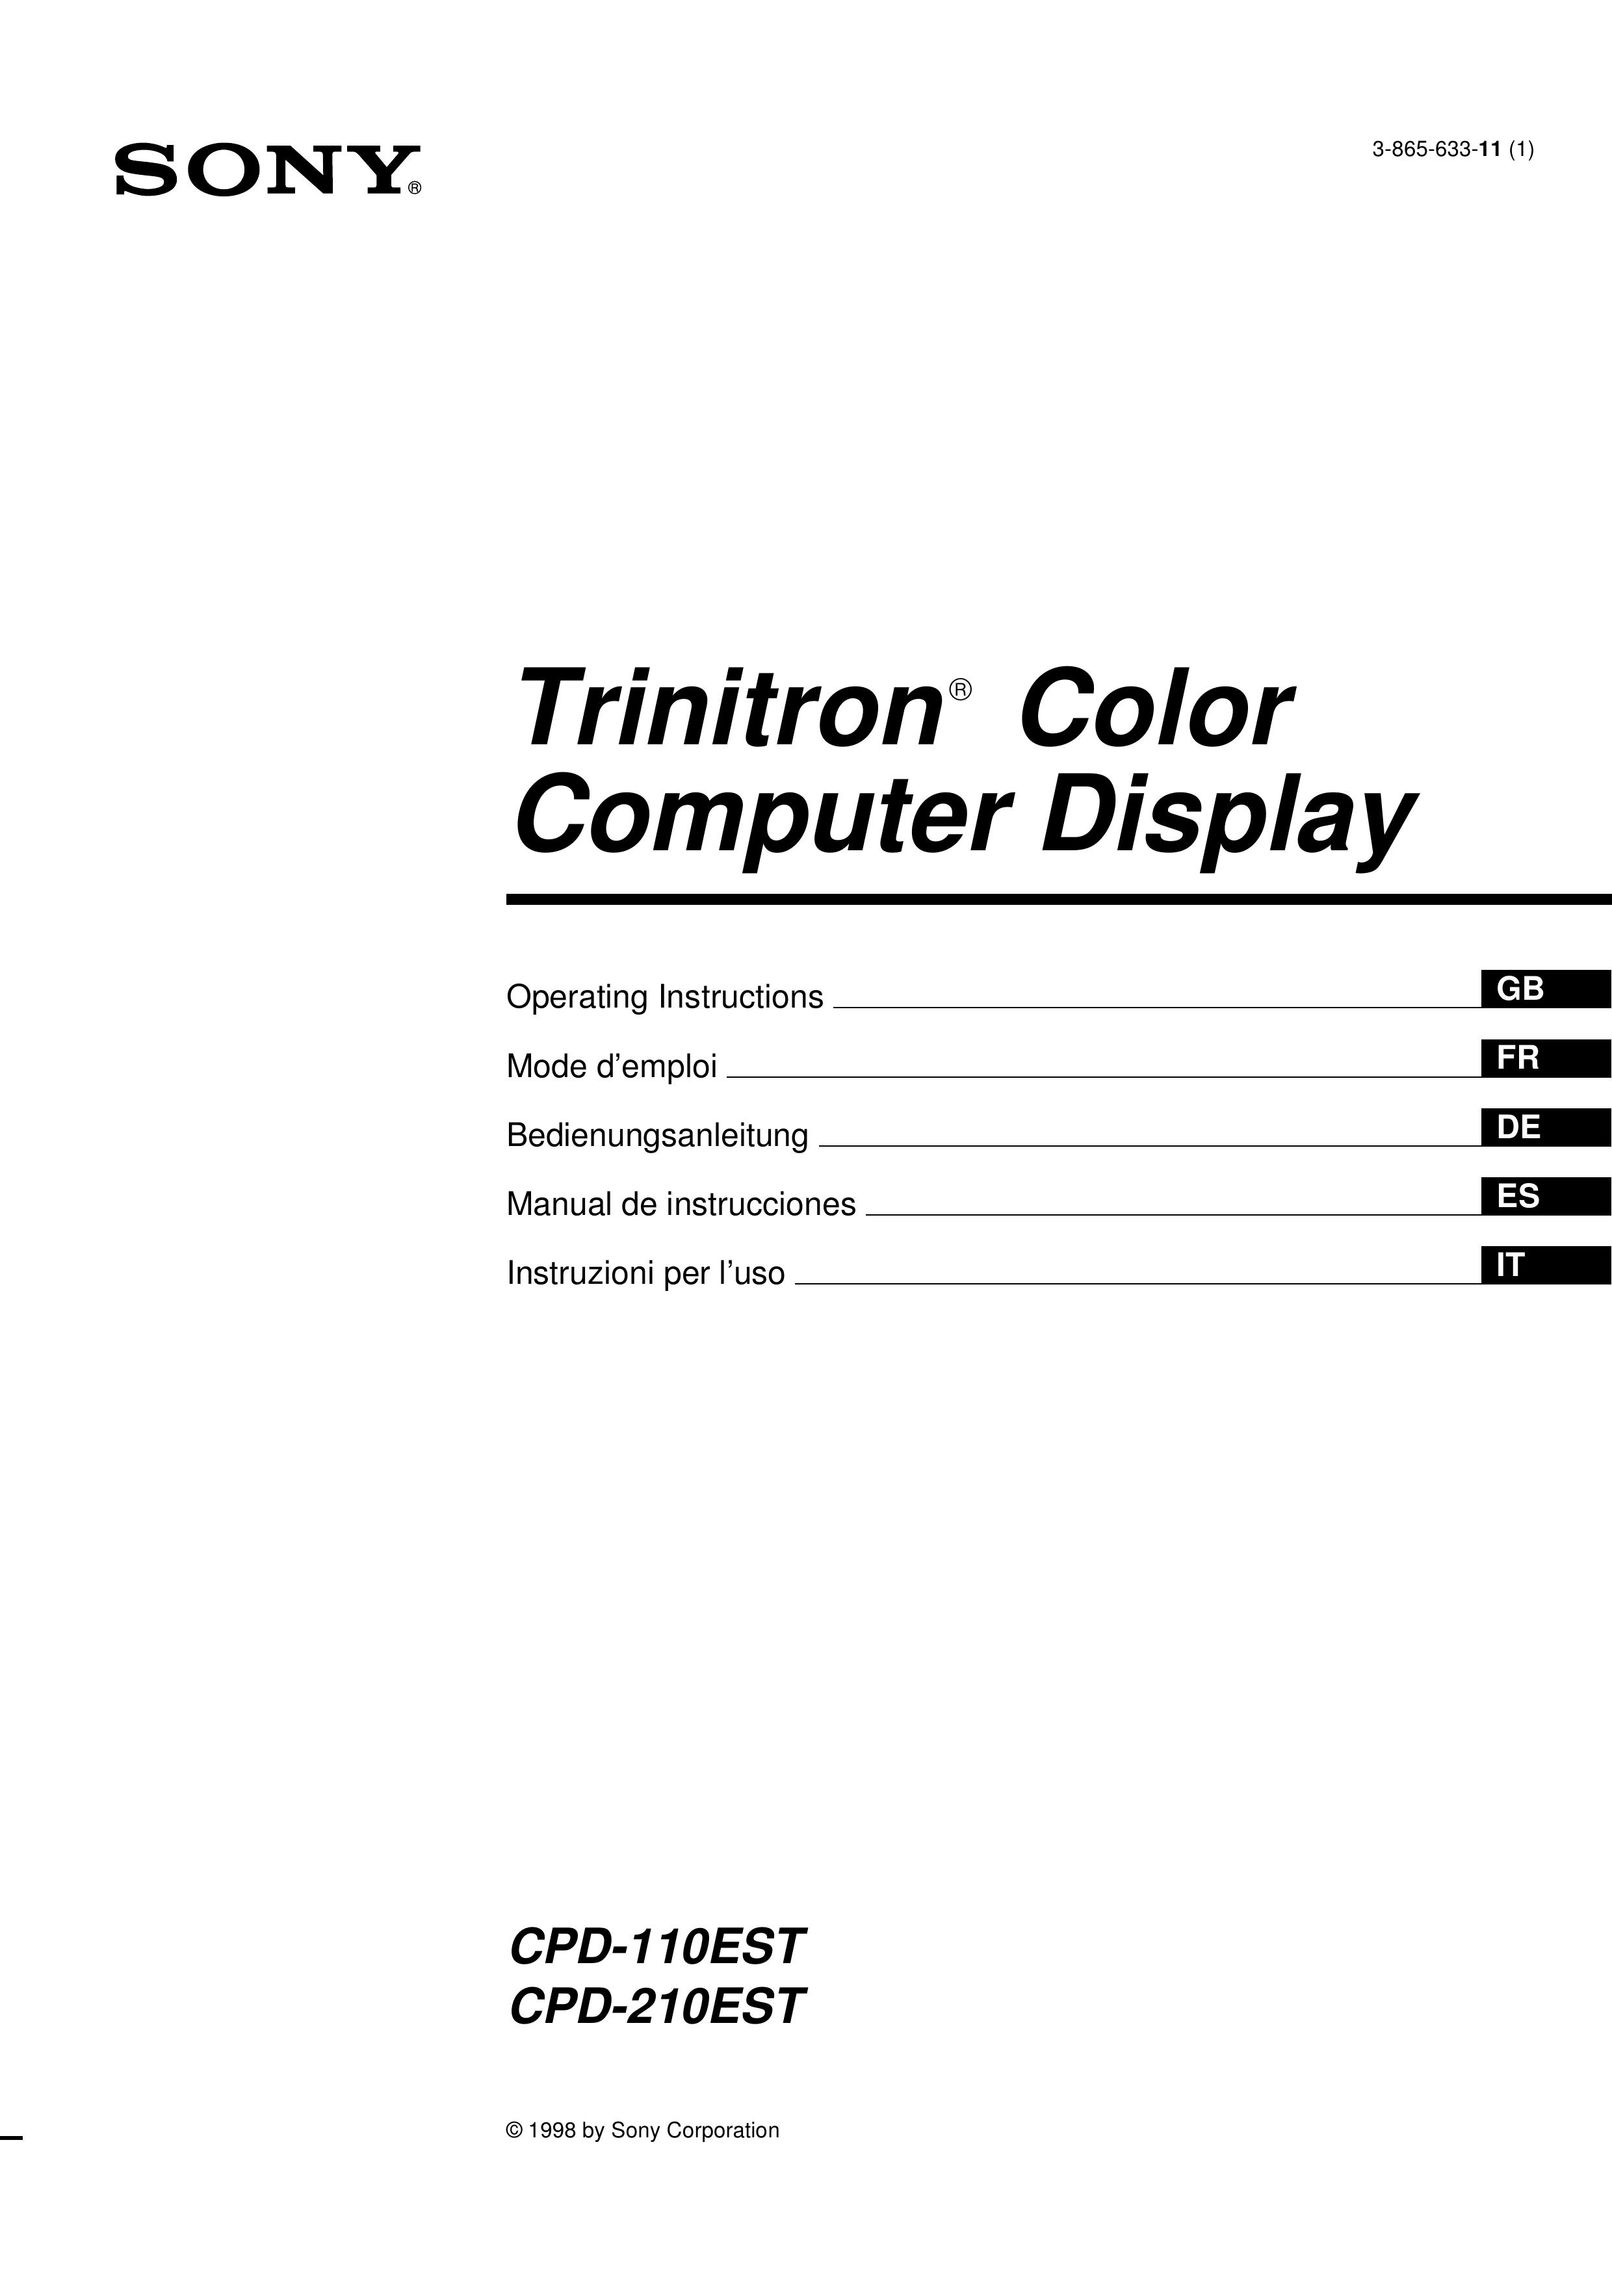 Sony CPD-110EST Computer Monitor User Manual